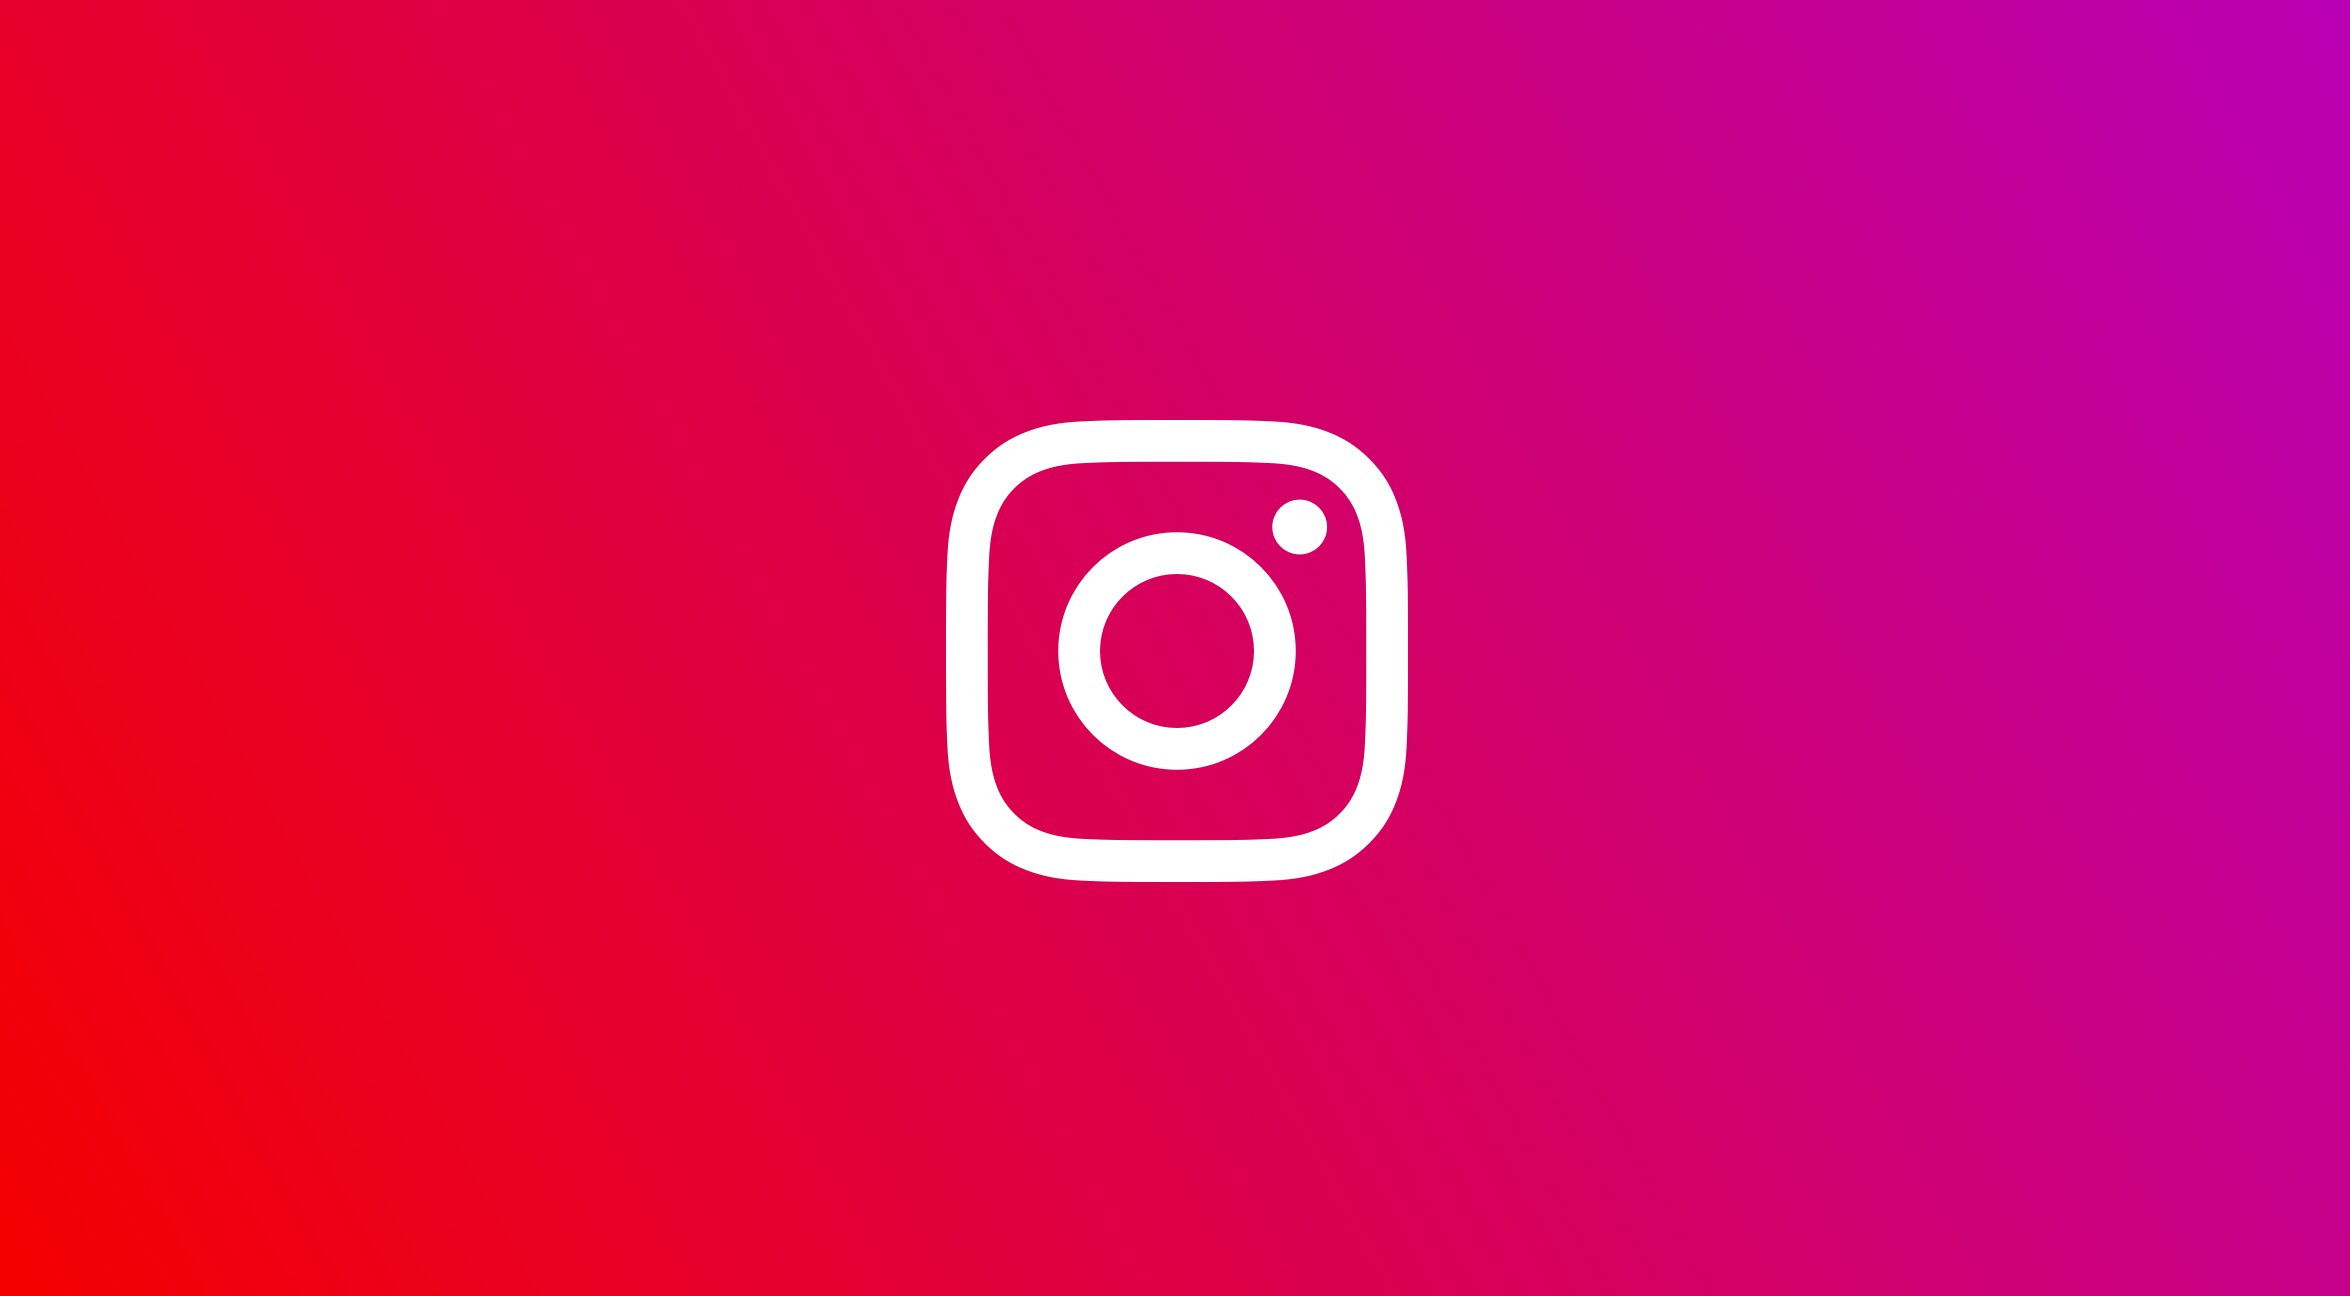 Instagram prepares Twitter competitor for summer release